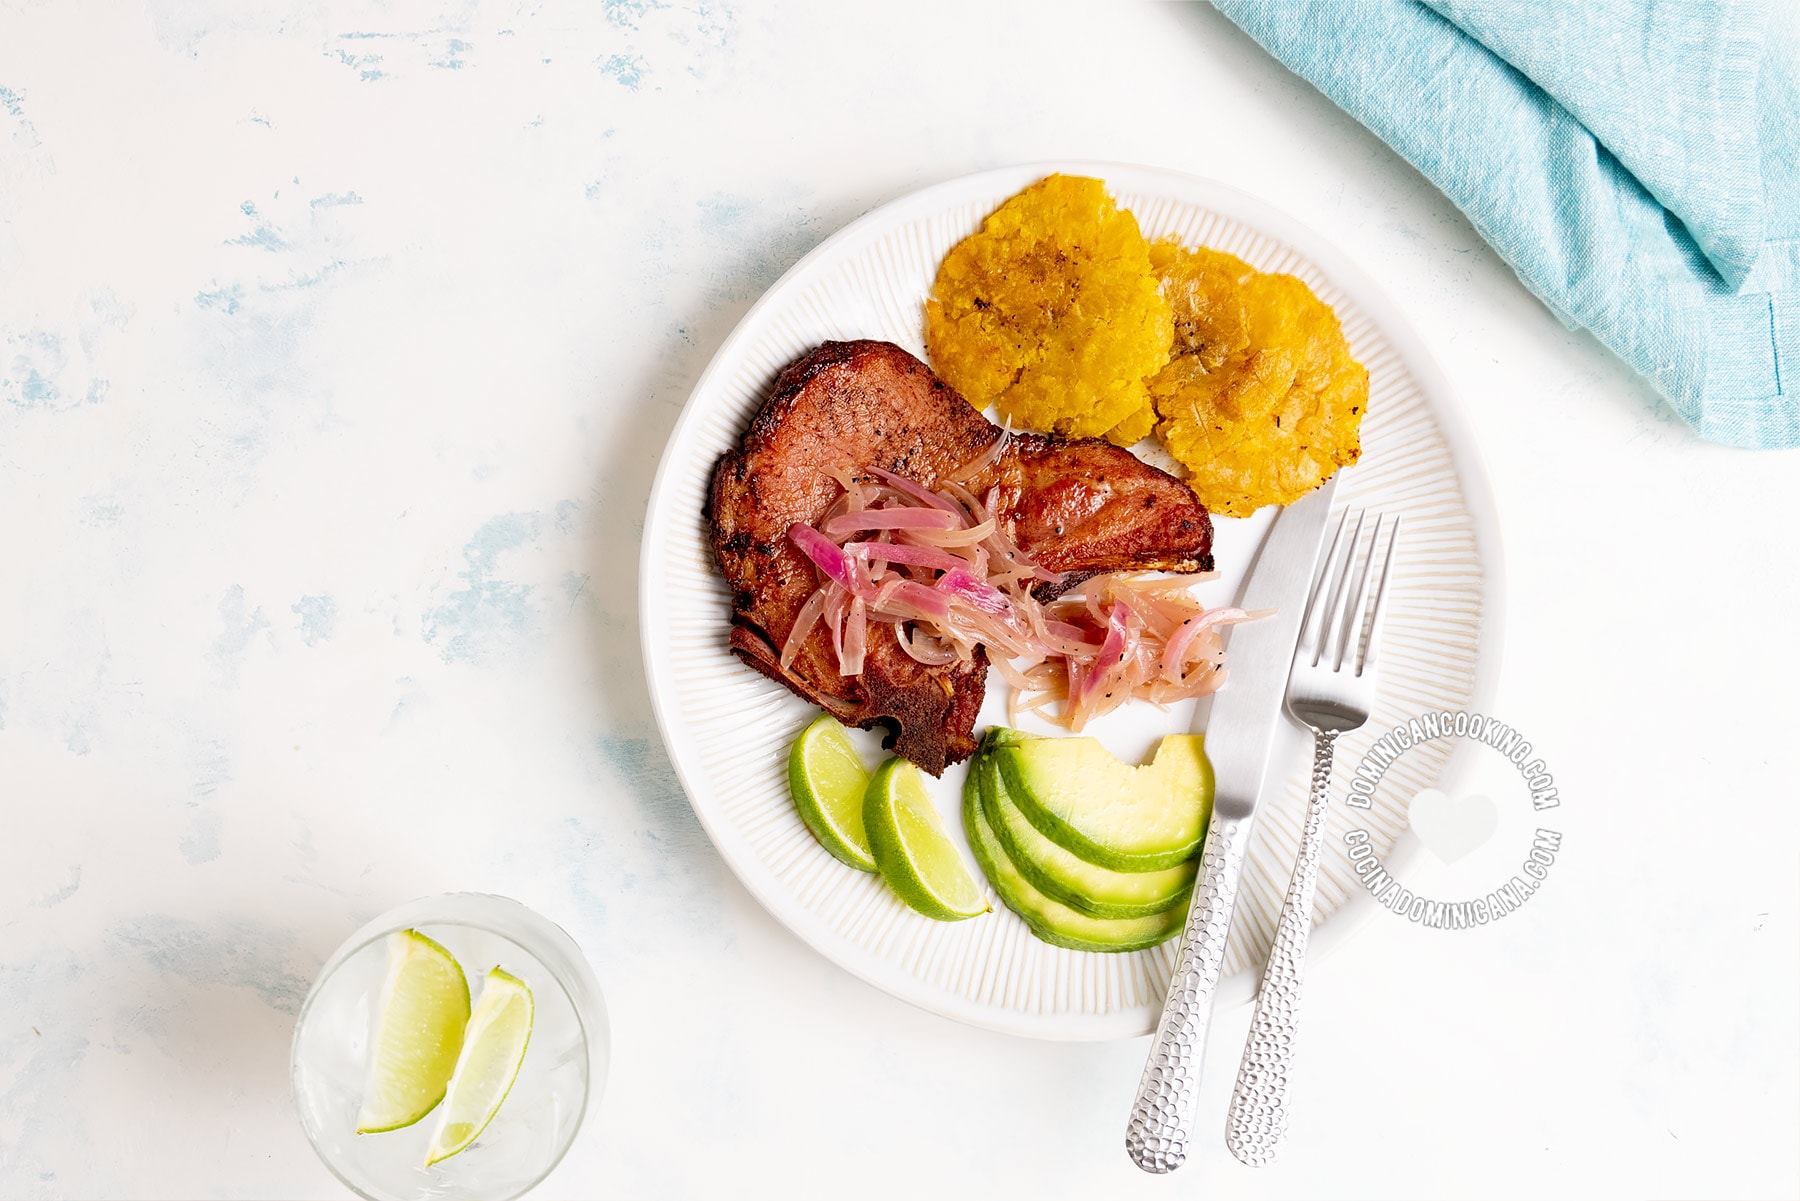 Chuletas Fritas (Dominican Fried Smoked Pork Chops) with Tostones and Avocado